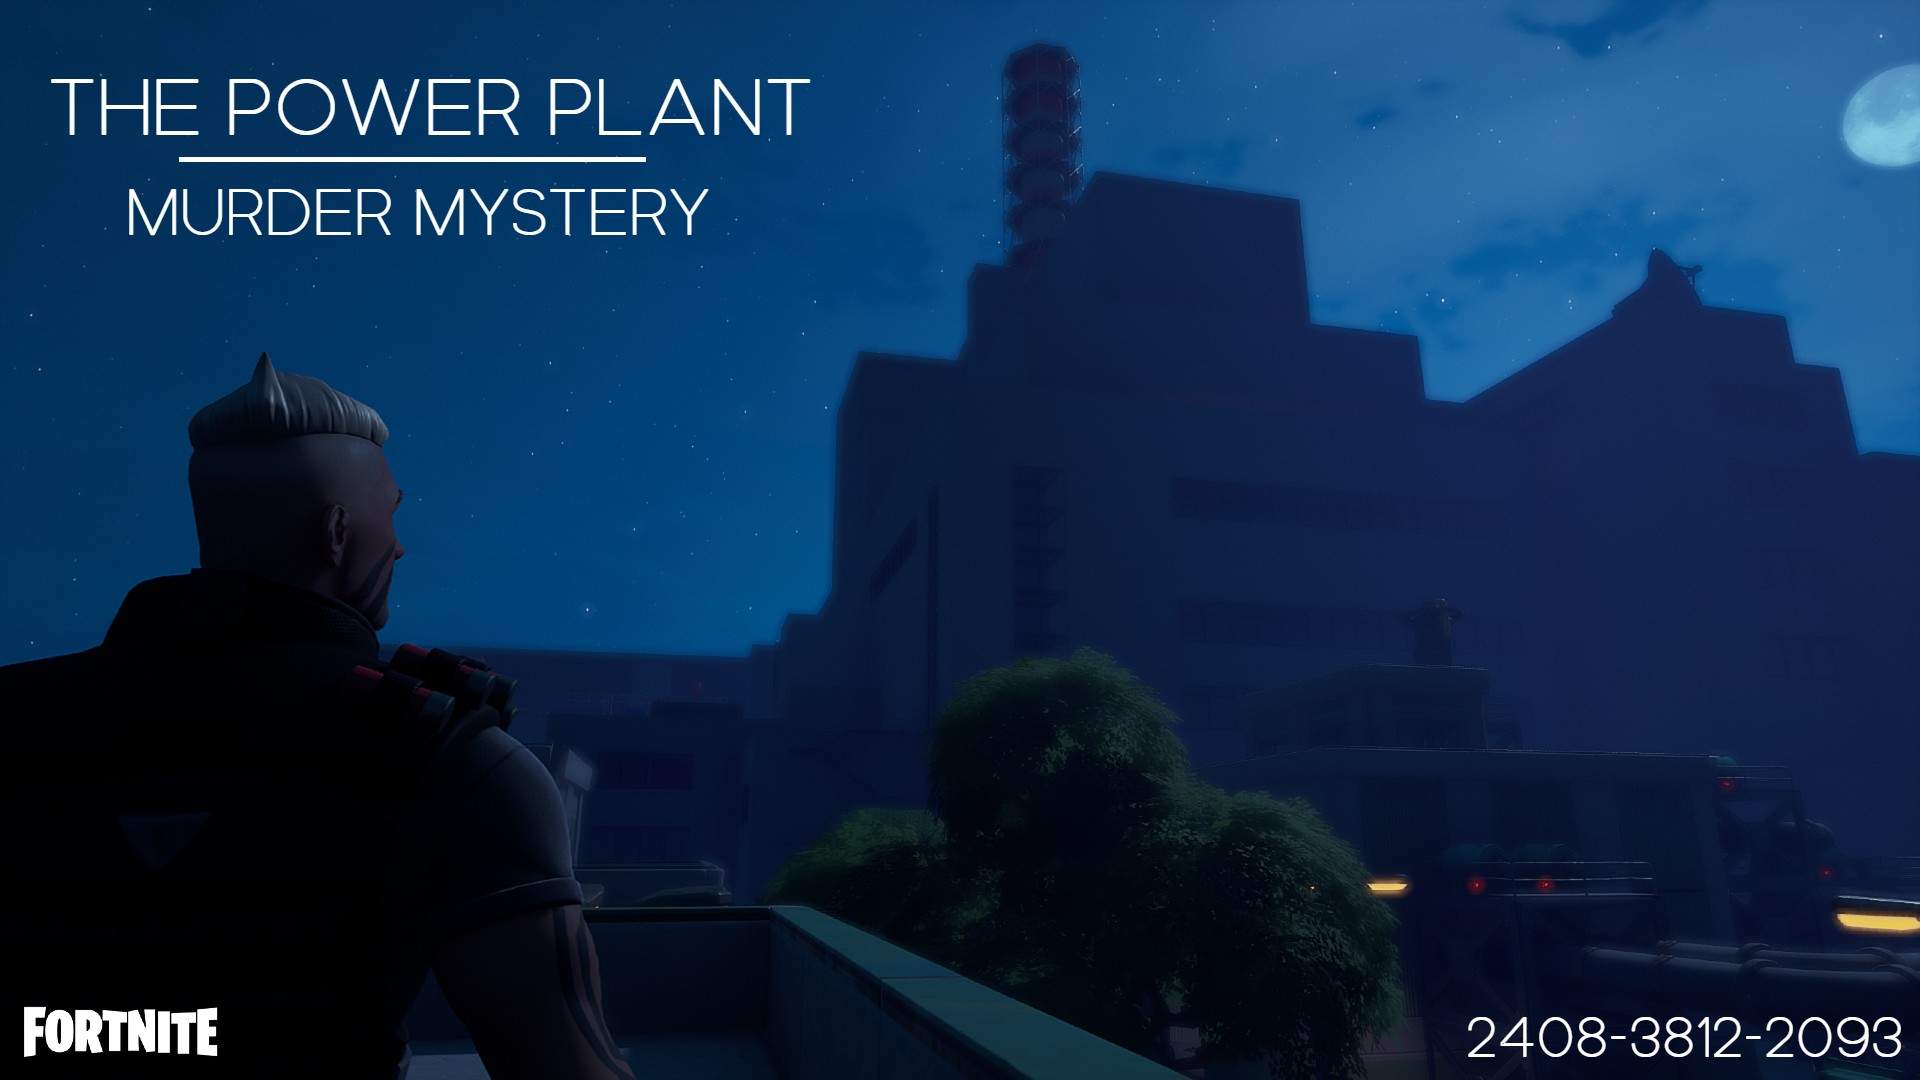 THE POWER PLANT - MURDER MYSTERY